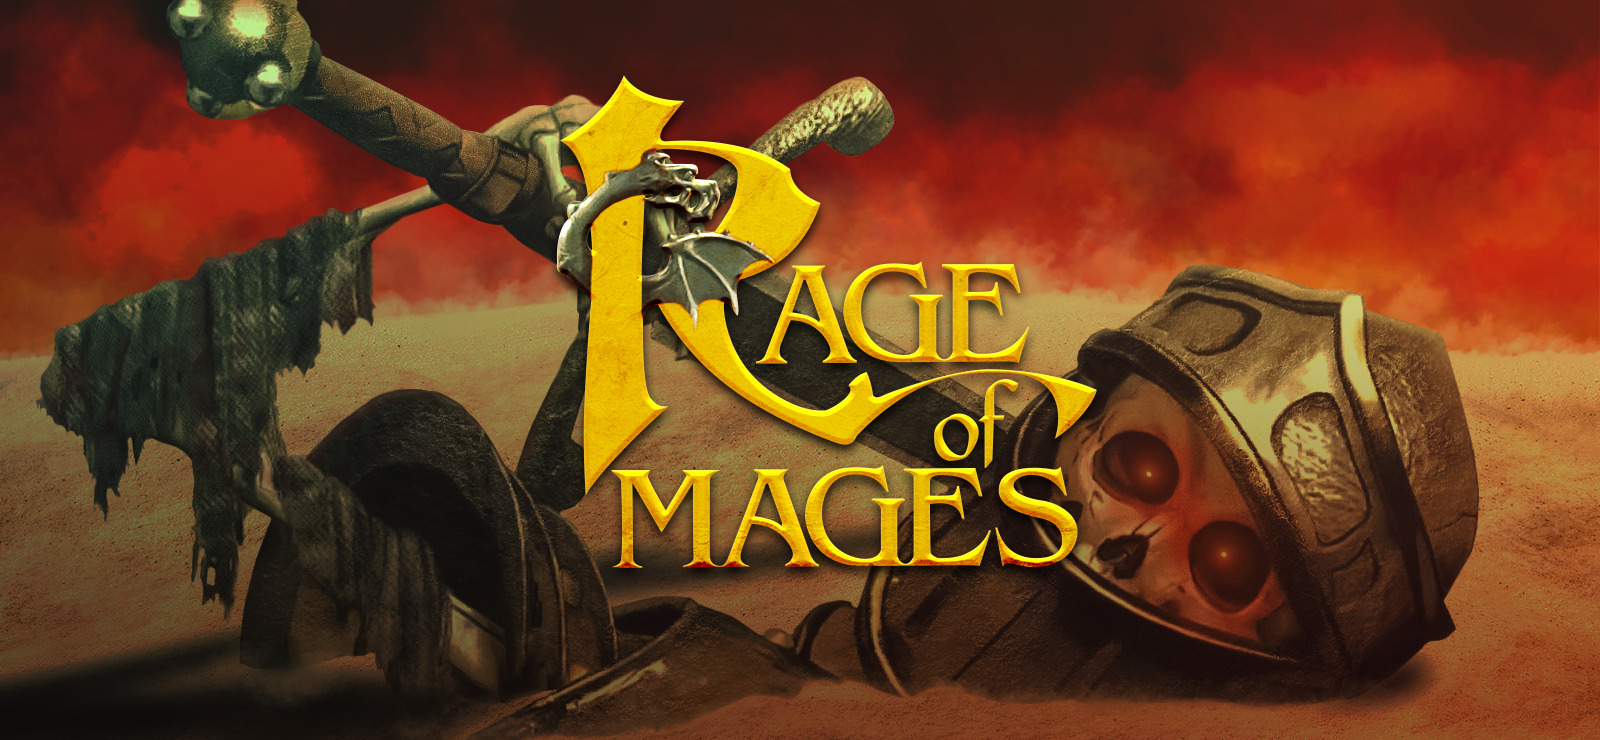 Rage of mages steam